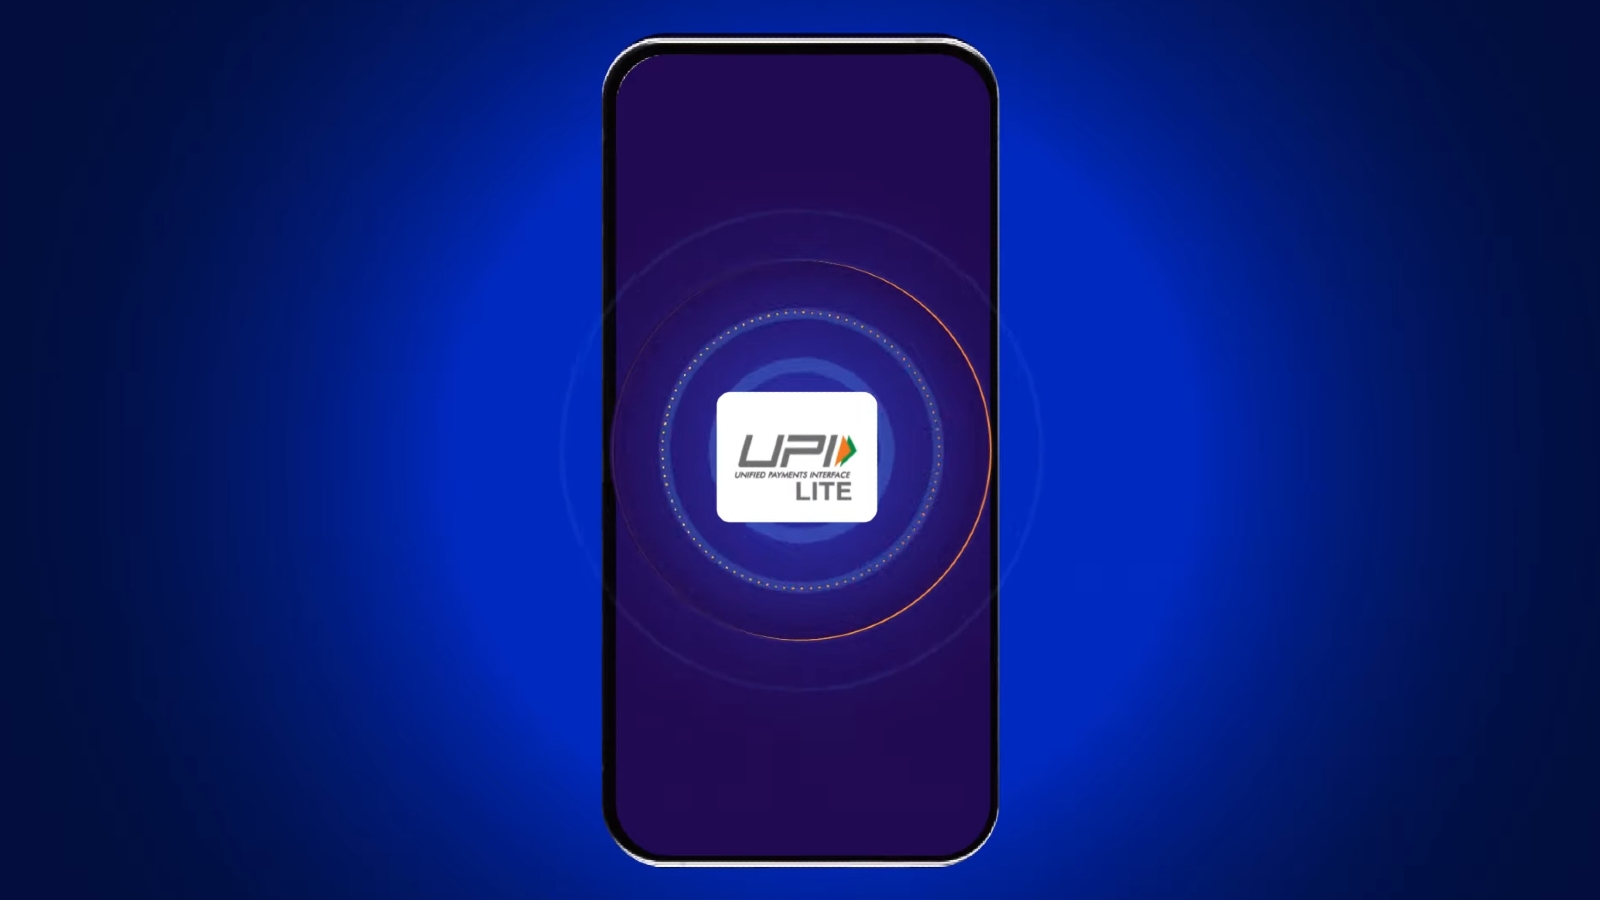 How to make payments using UPI Lite